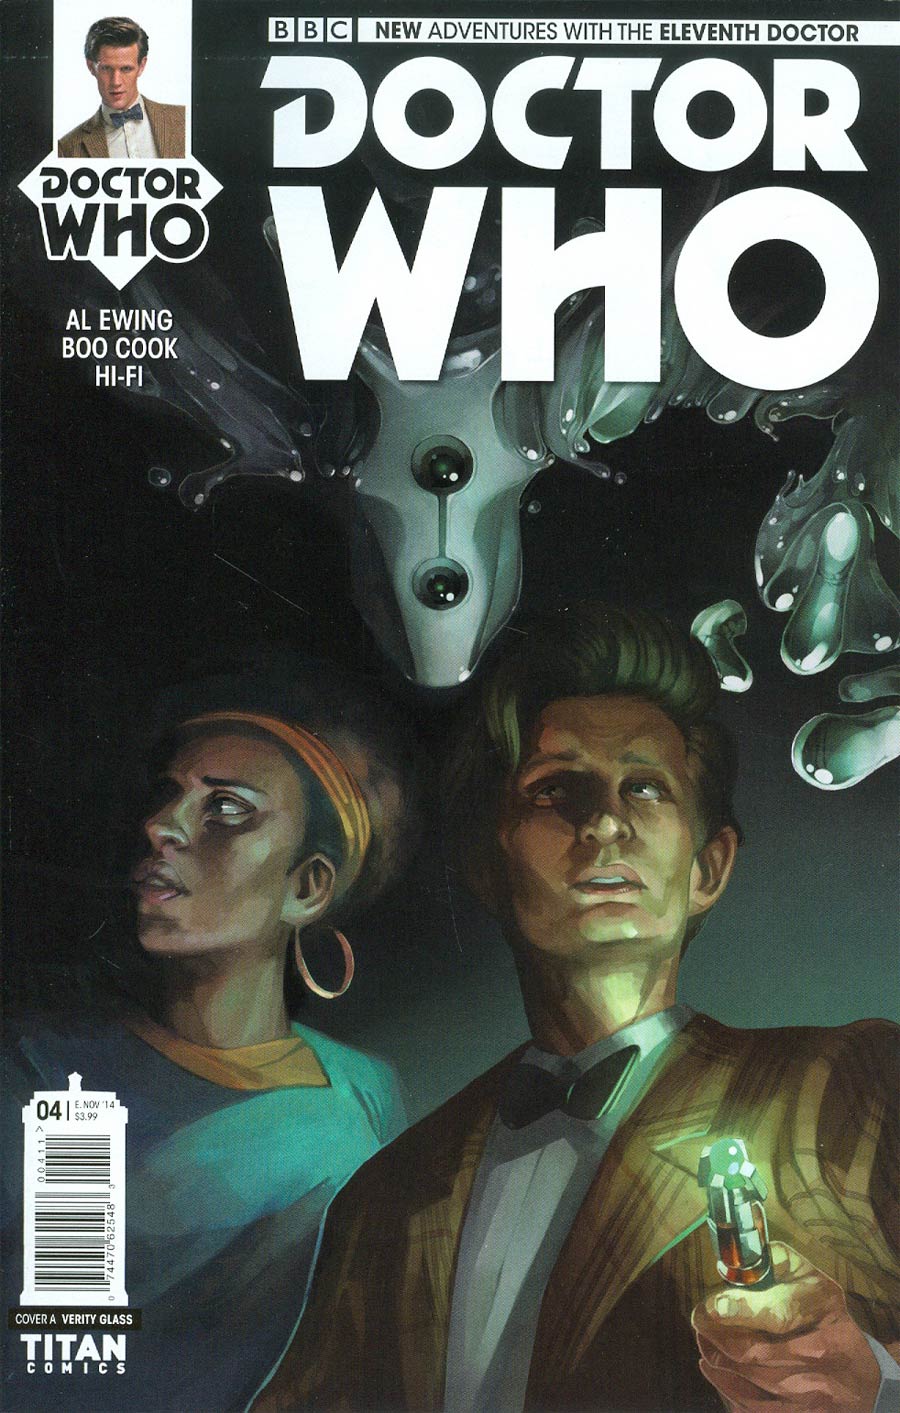 Doctor Who 11th Doctor #4 Cover A Regular Verity Glass Cover